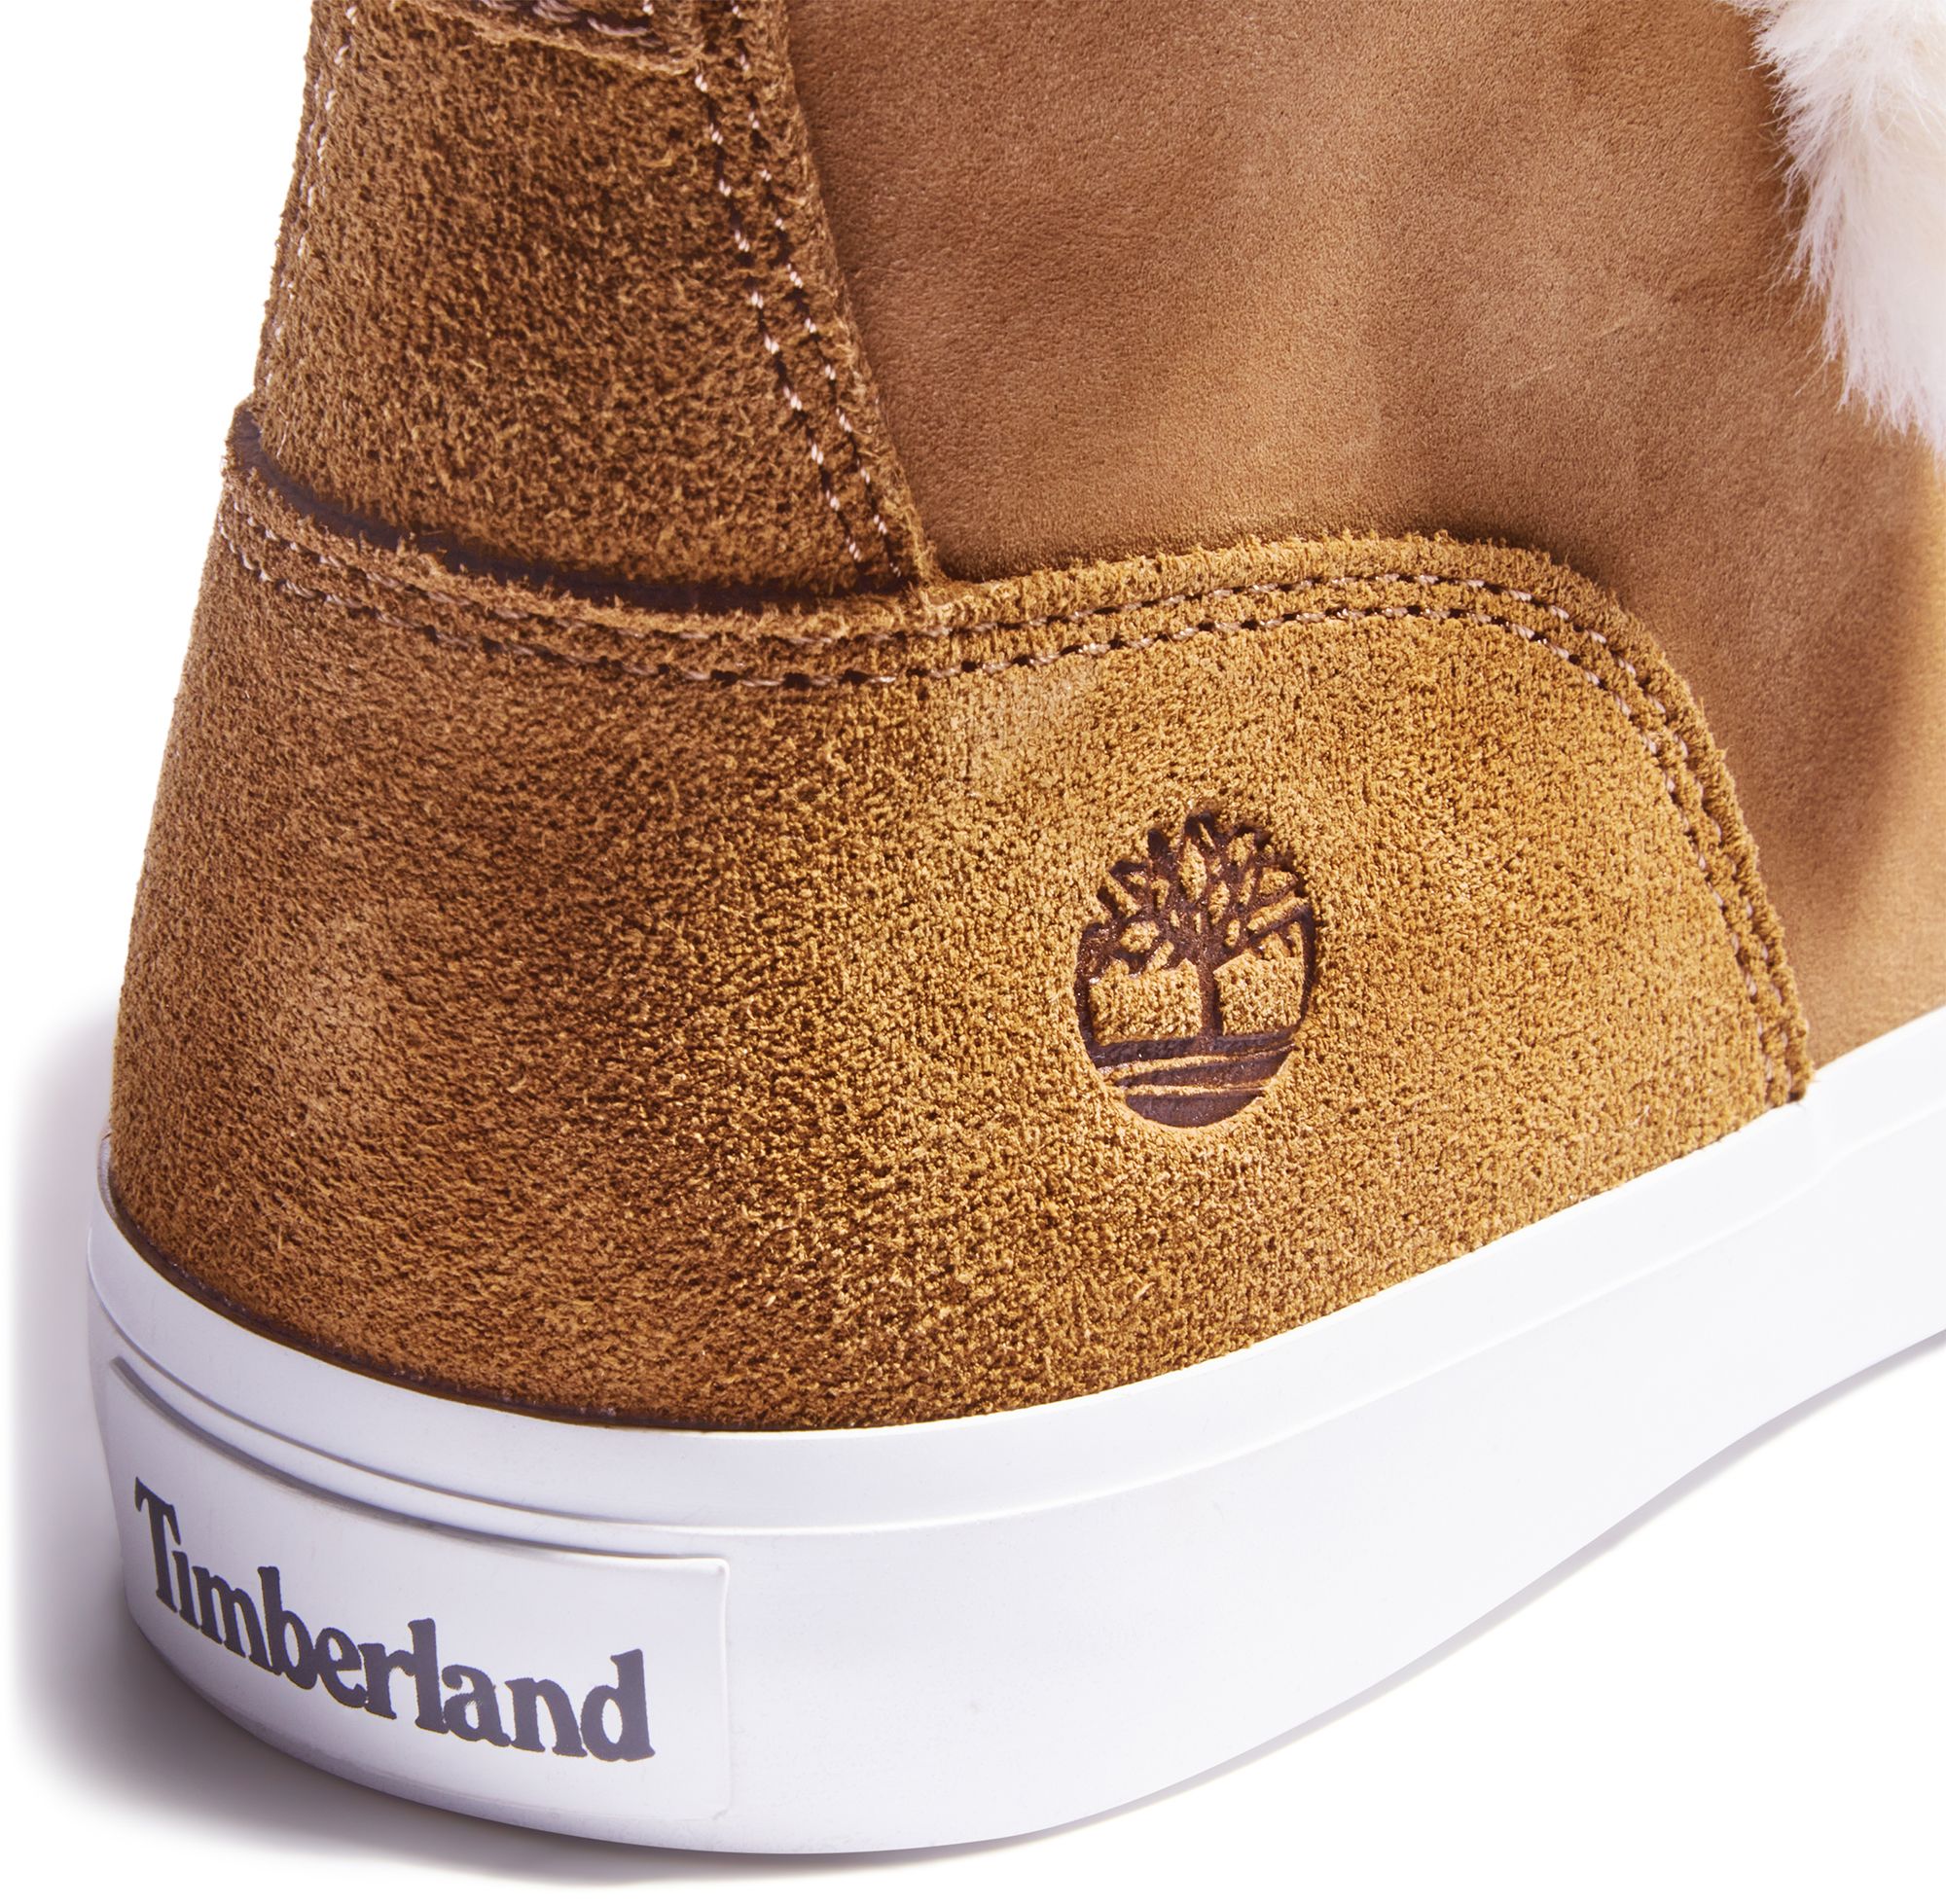 Timberland Women's High Top Warm Lined Sneakers